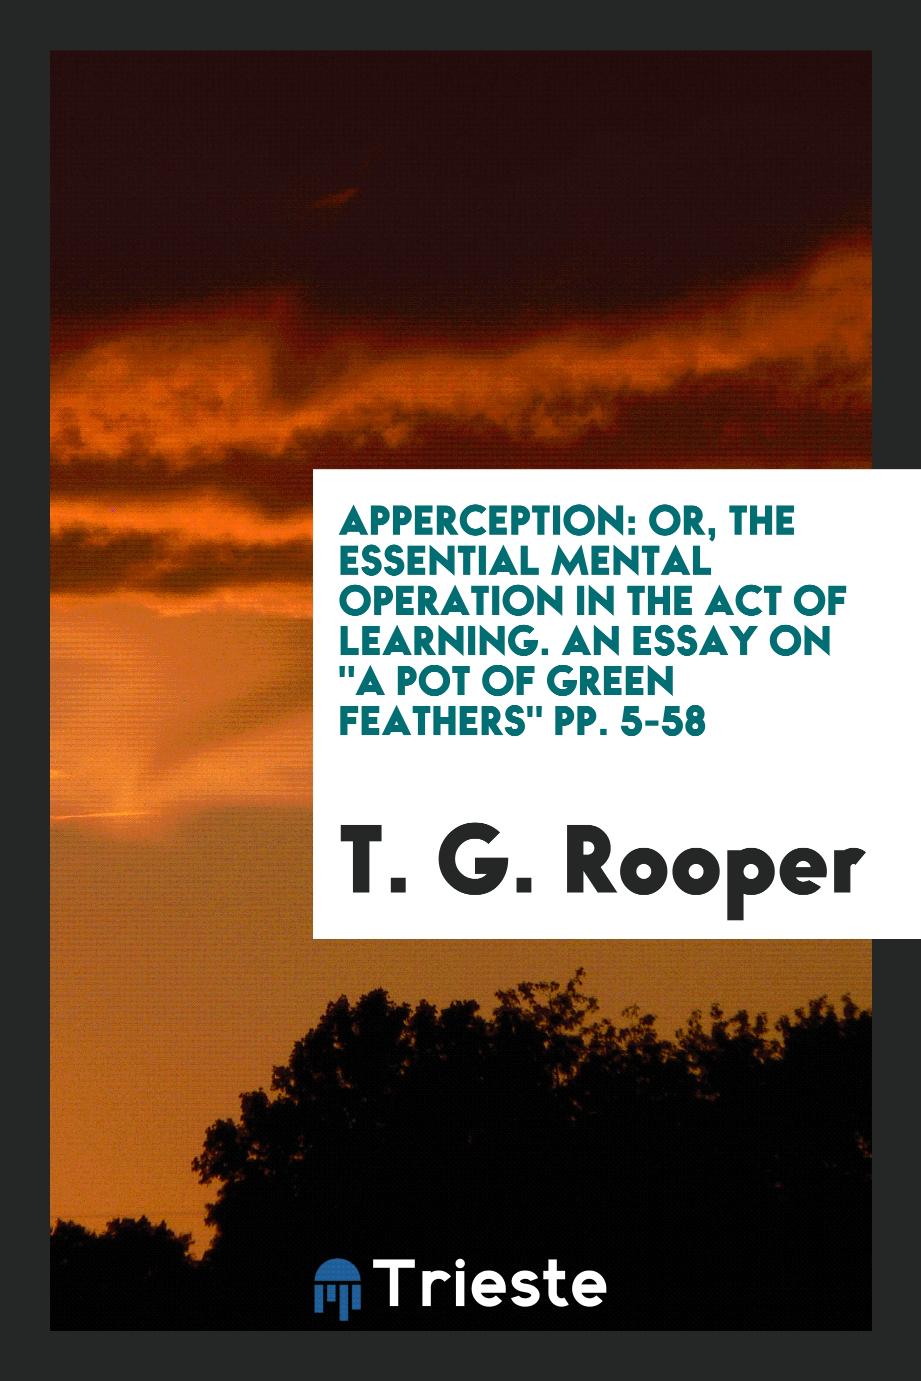 Apperception: Or, The Essential Mental Operation in the Act of Learning. An Essay on "A Pot of green feathers" pp. 5-58